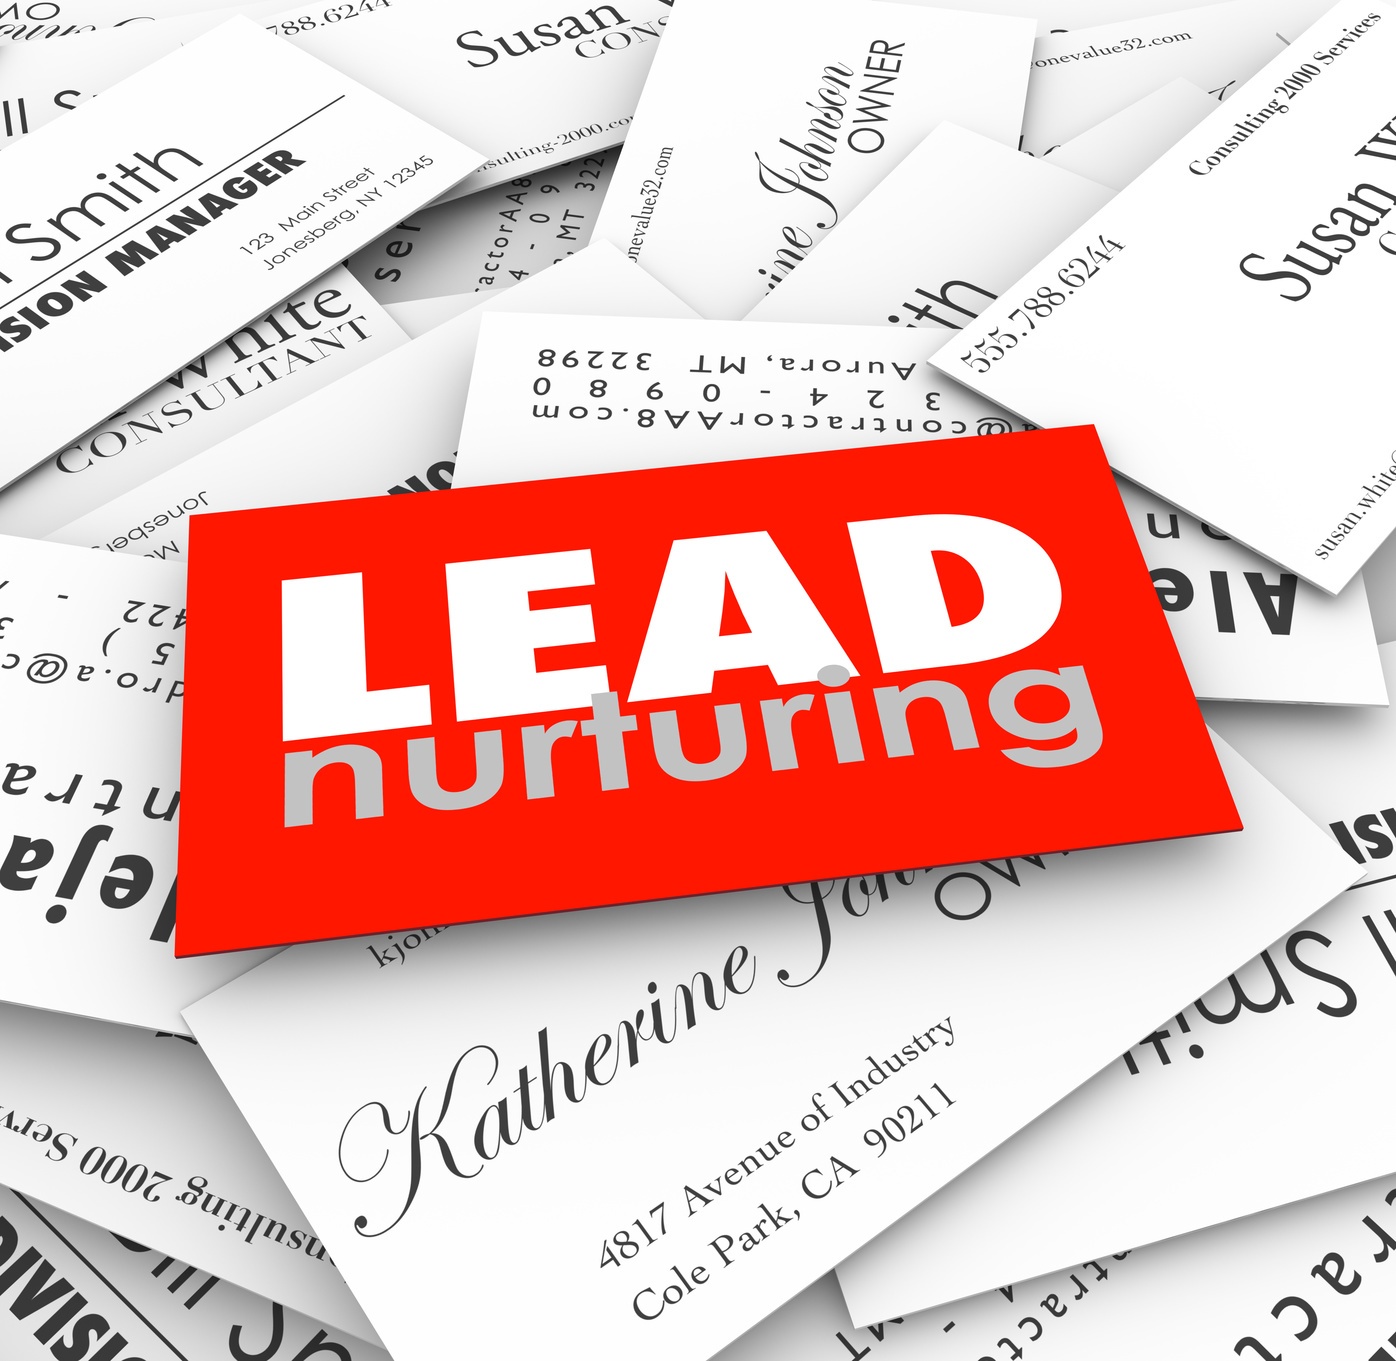 Thank you pages, emails kick off lead nurturing